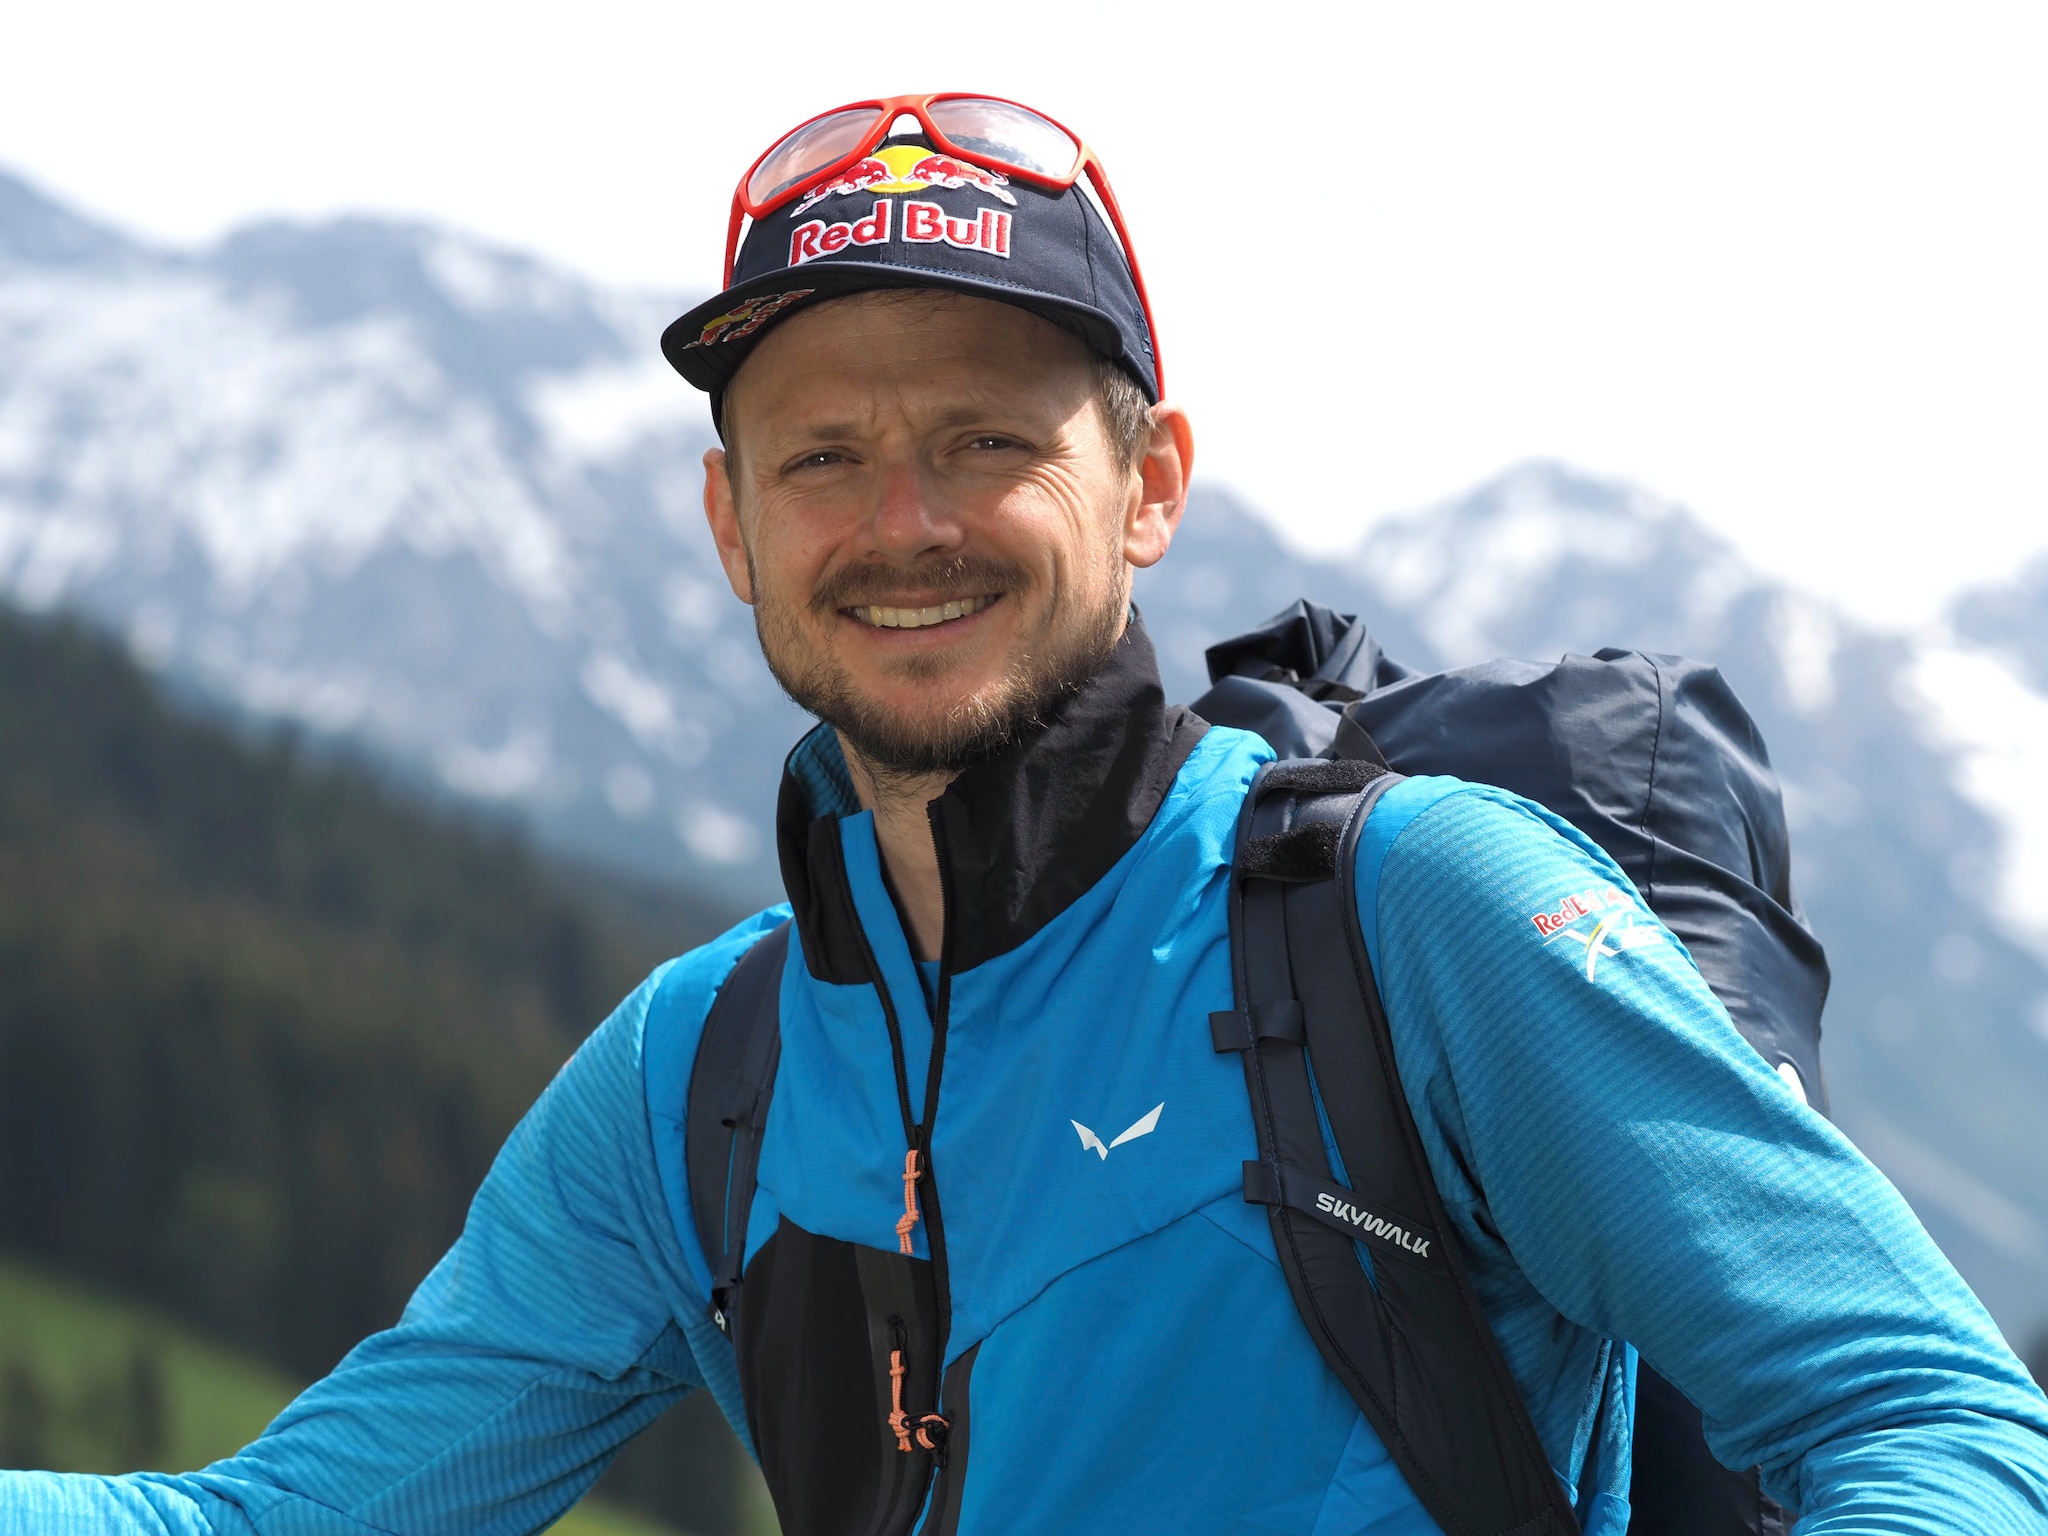 Paul Guschlbauer (AUT1) poses for portrait during Red Bull X-Alps 2021 preparations in Wagrain, Austria on August 12, 2021